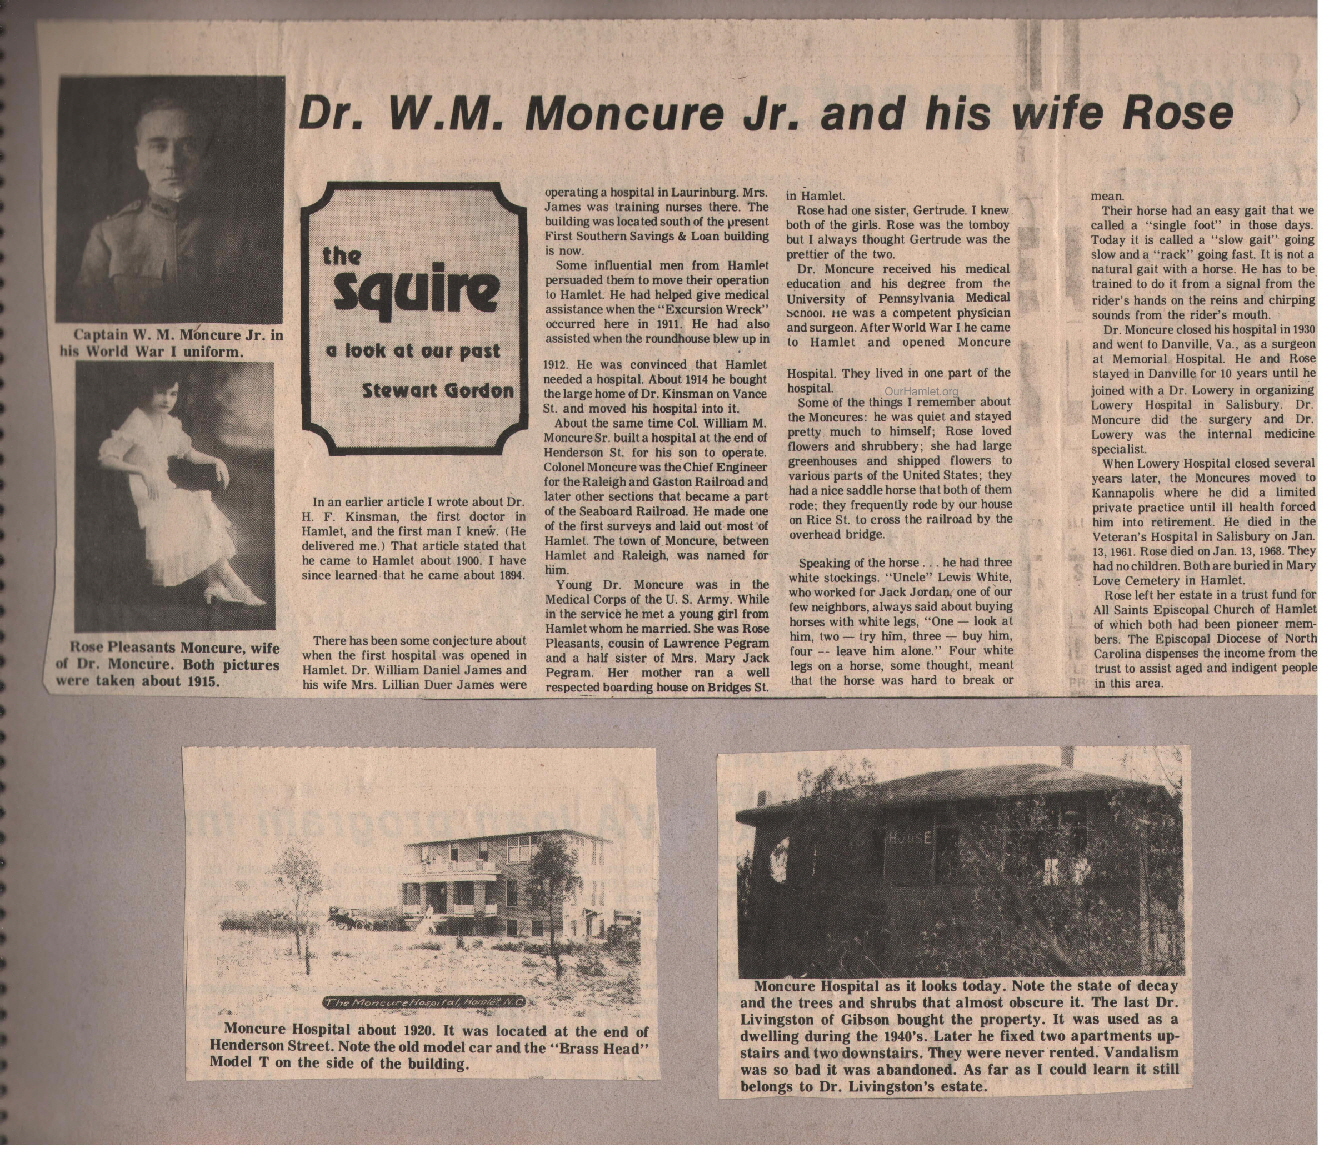 The Squire - Dr Moncure OH